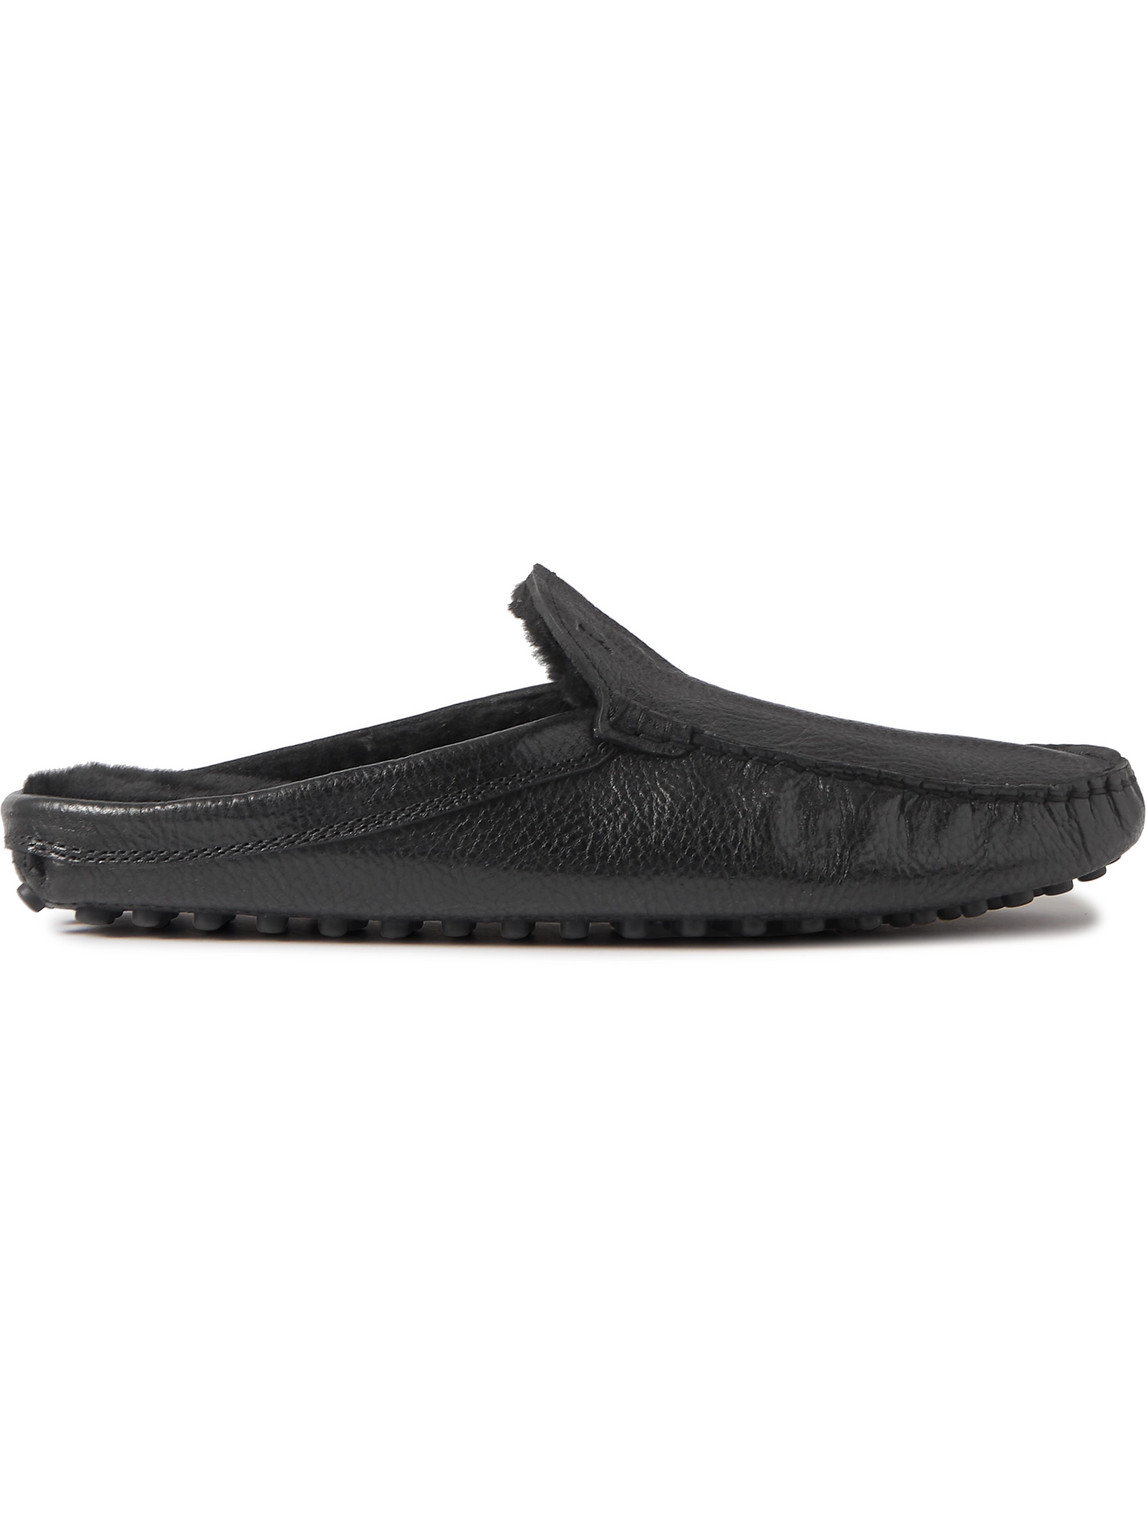 Tod's Shearling-Lined Full-Grain Leather Slippers | Smart Closet